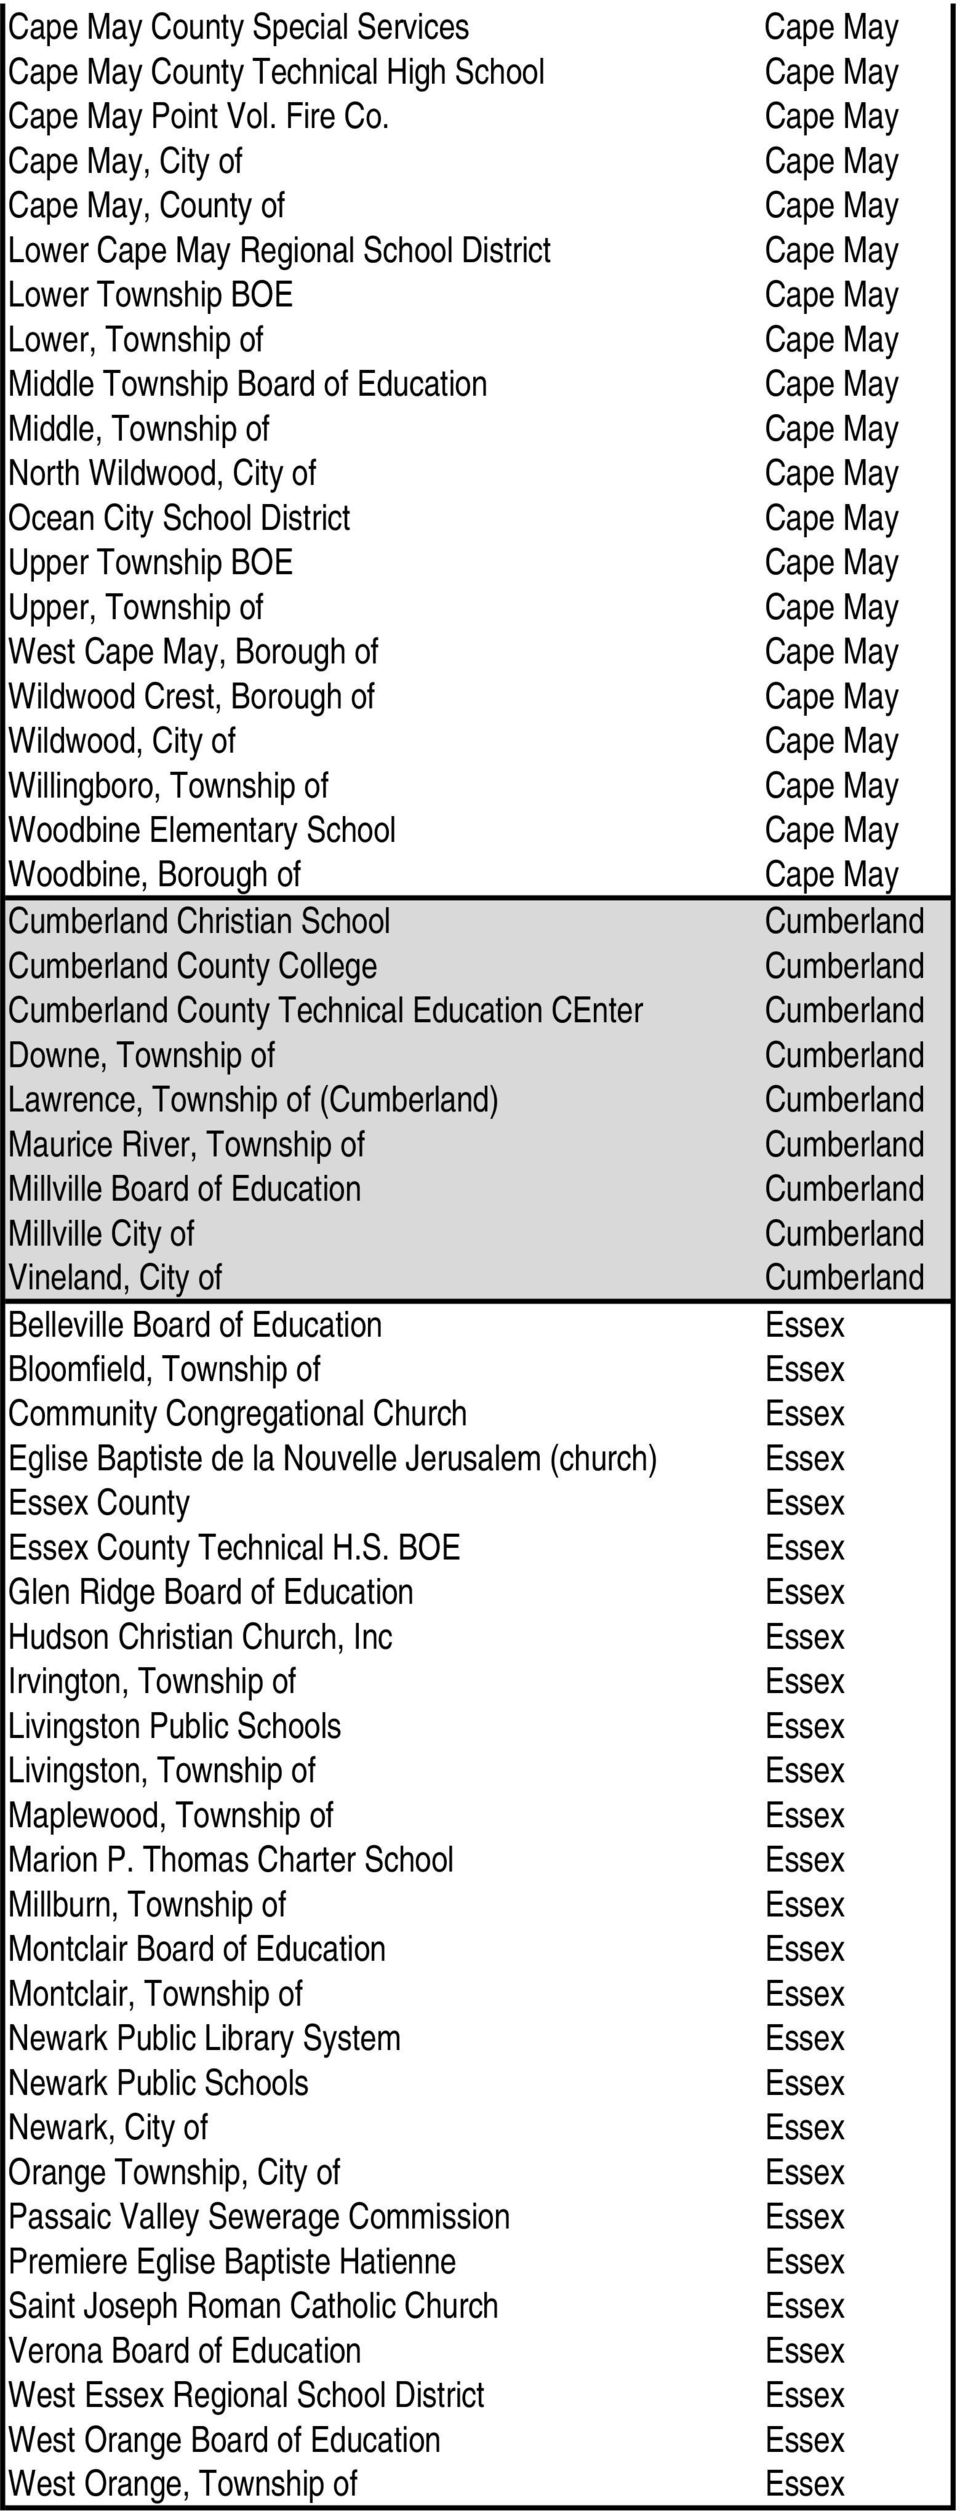 Township BOE Upper, Township of West, Borough of Wildwood Crest, Borough of Wildwood, City of Willingboro, Township of Woodbine Elementary School Woodbine, Borough of Christian School County College